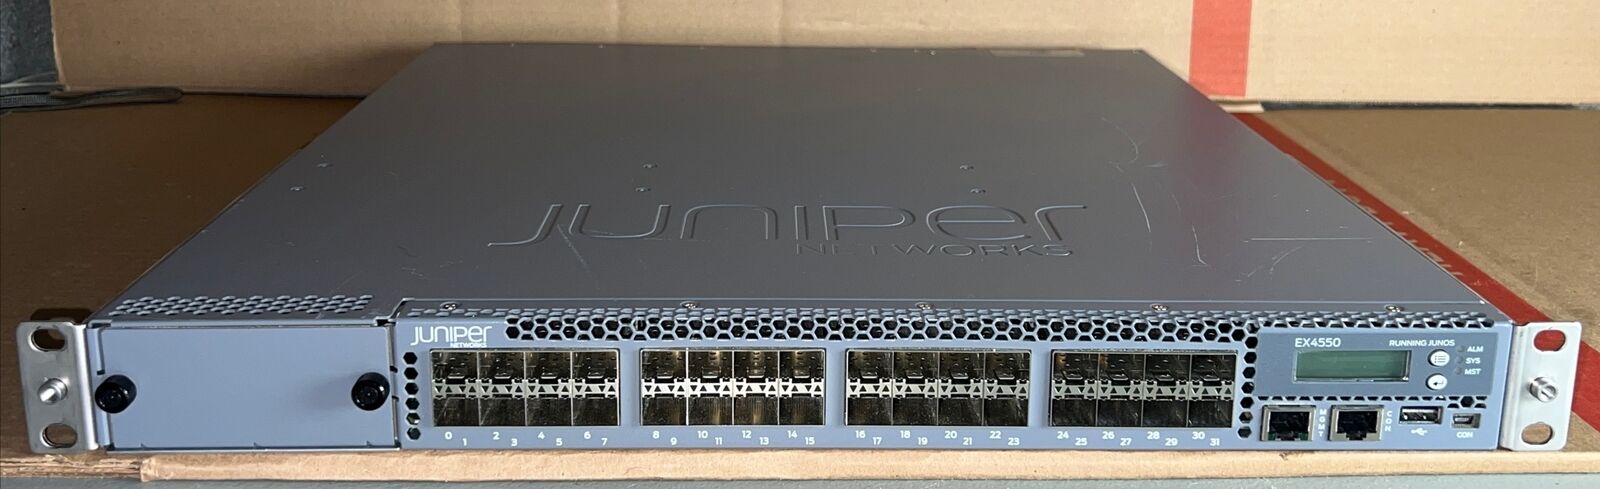 JUNIPER EX4550-32F-AFO 32-PORT ETHERNET SWITCH 2x POWER SUPPLY - TESTED